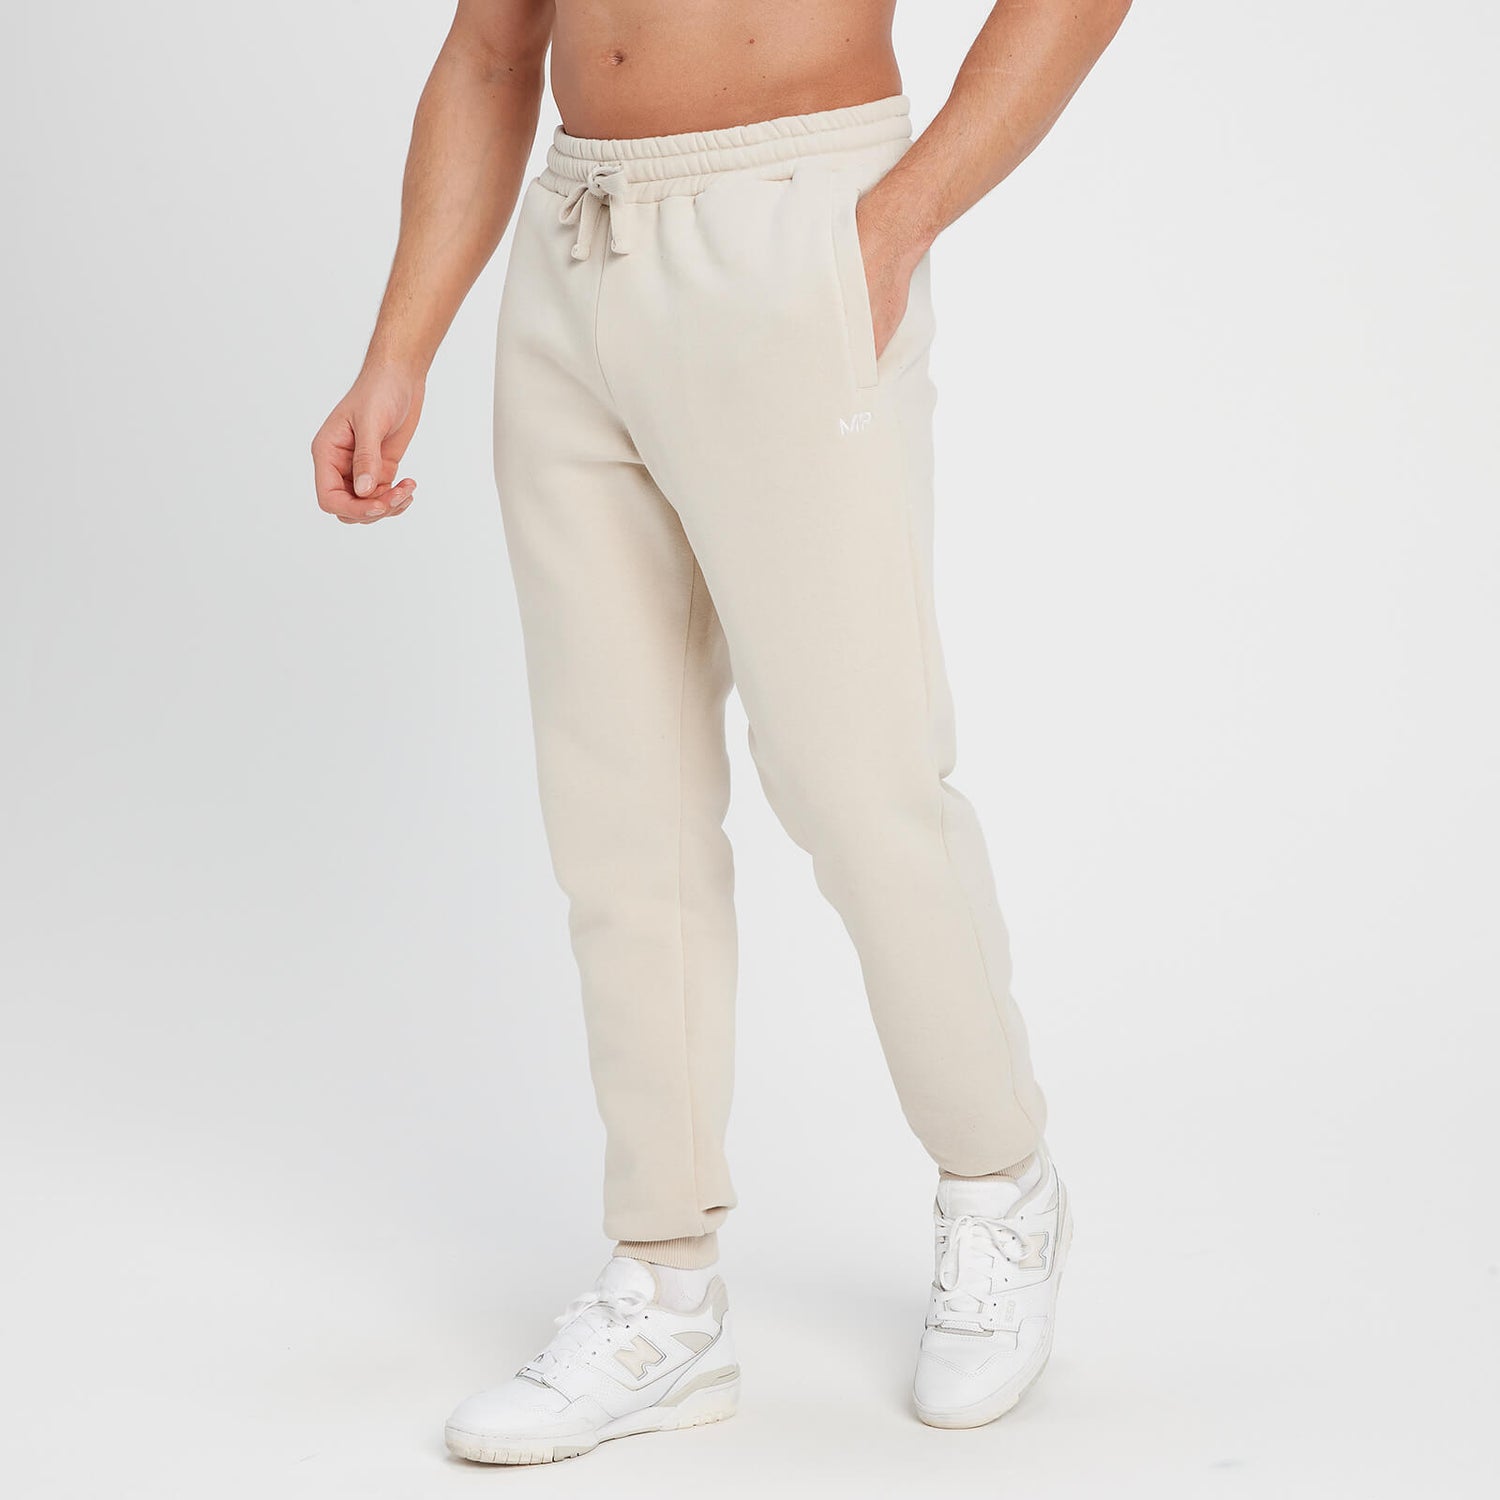 MP Men's Rest Day Joggers - Sand - XS